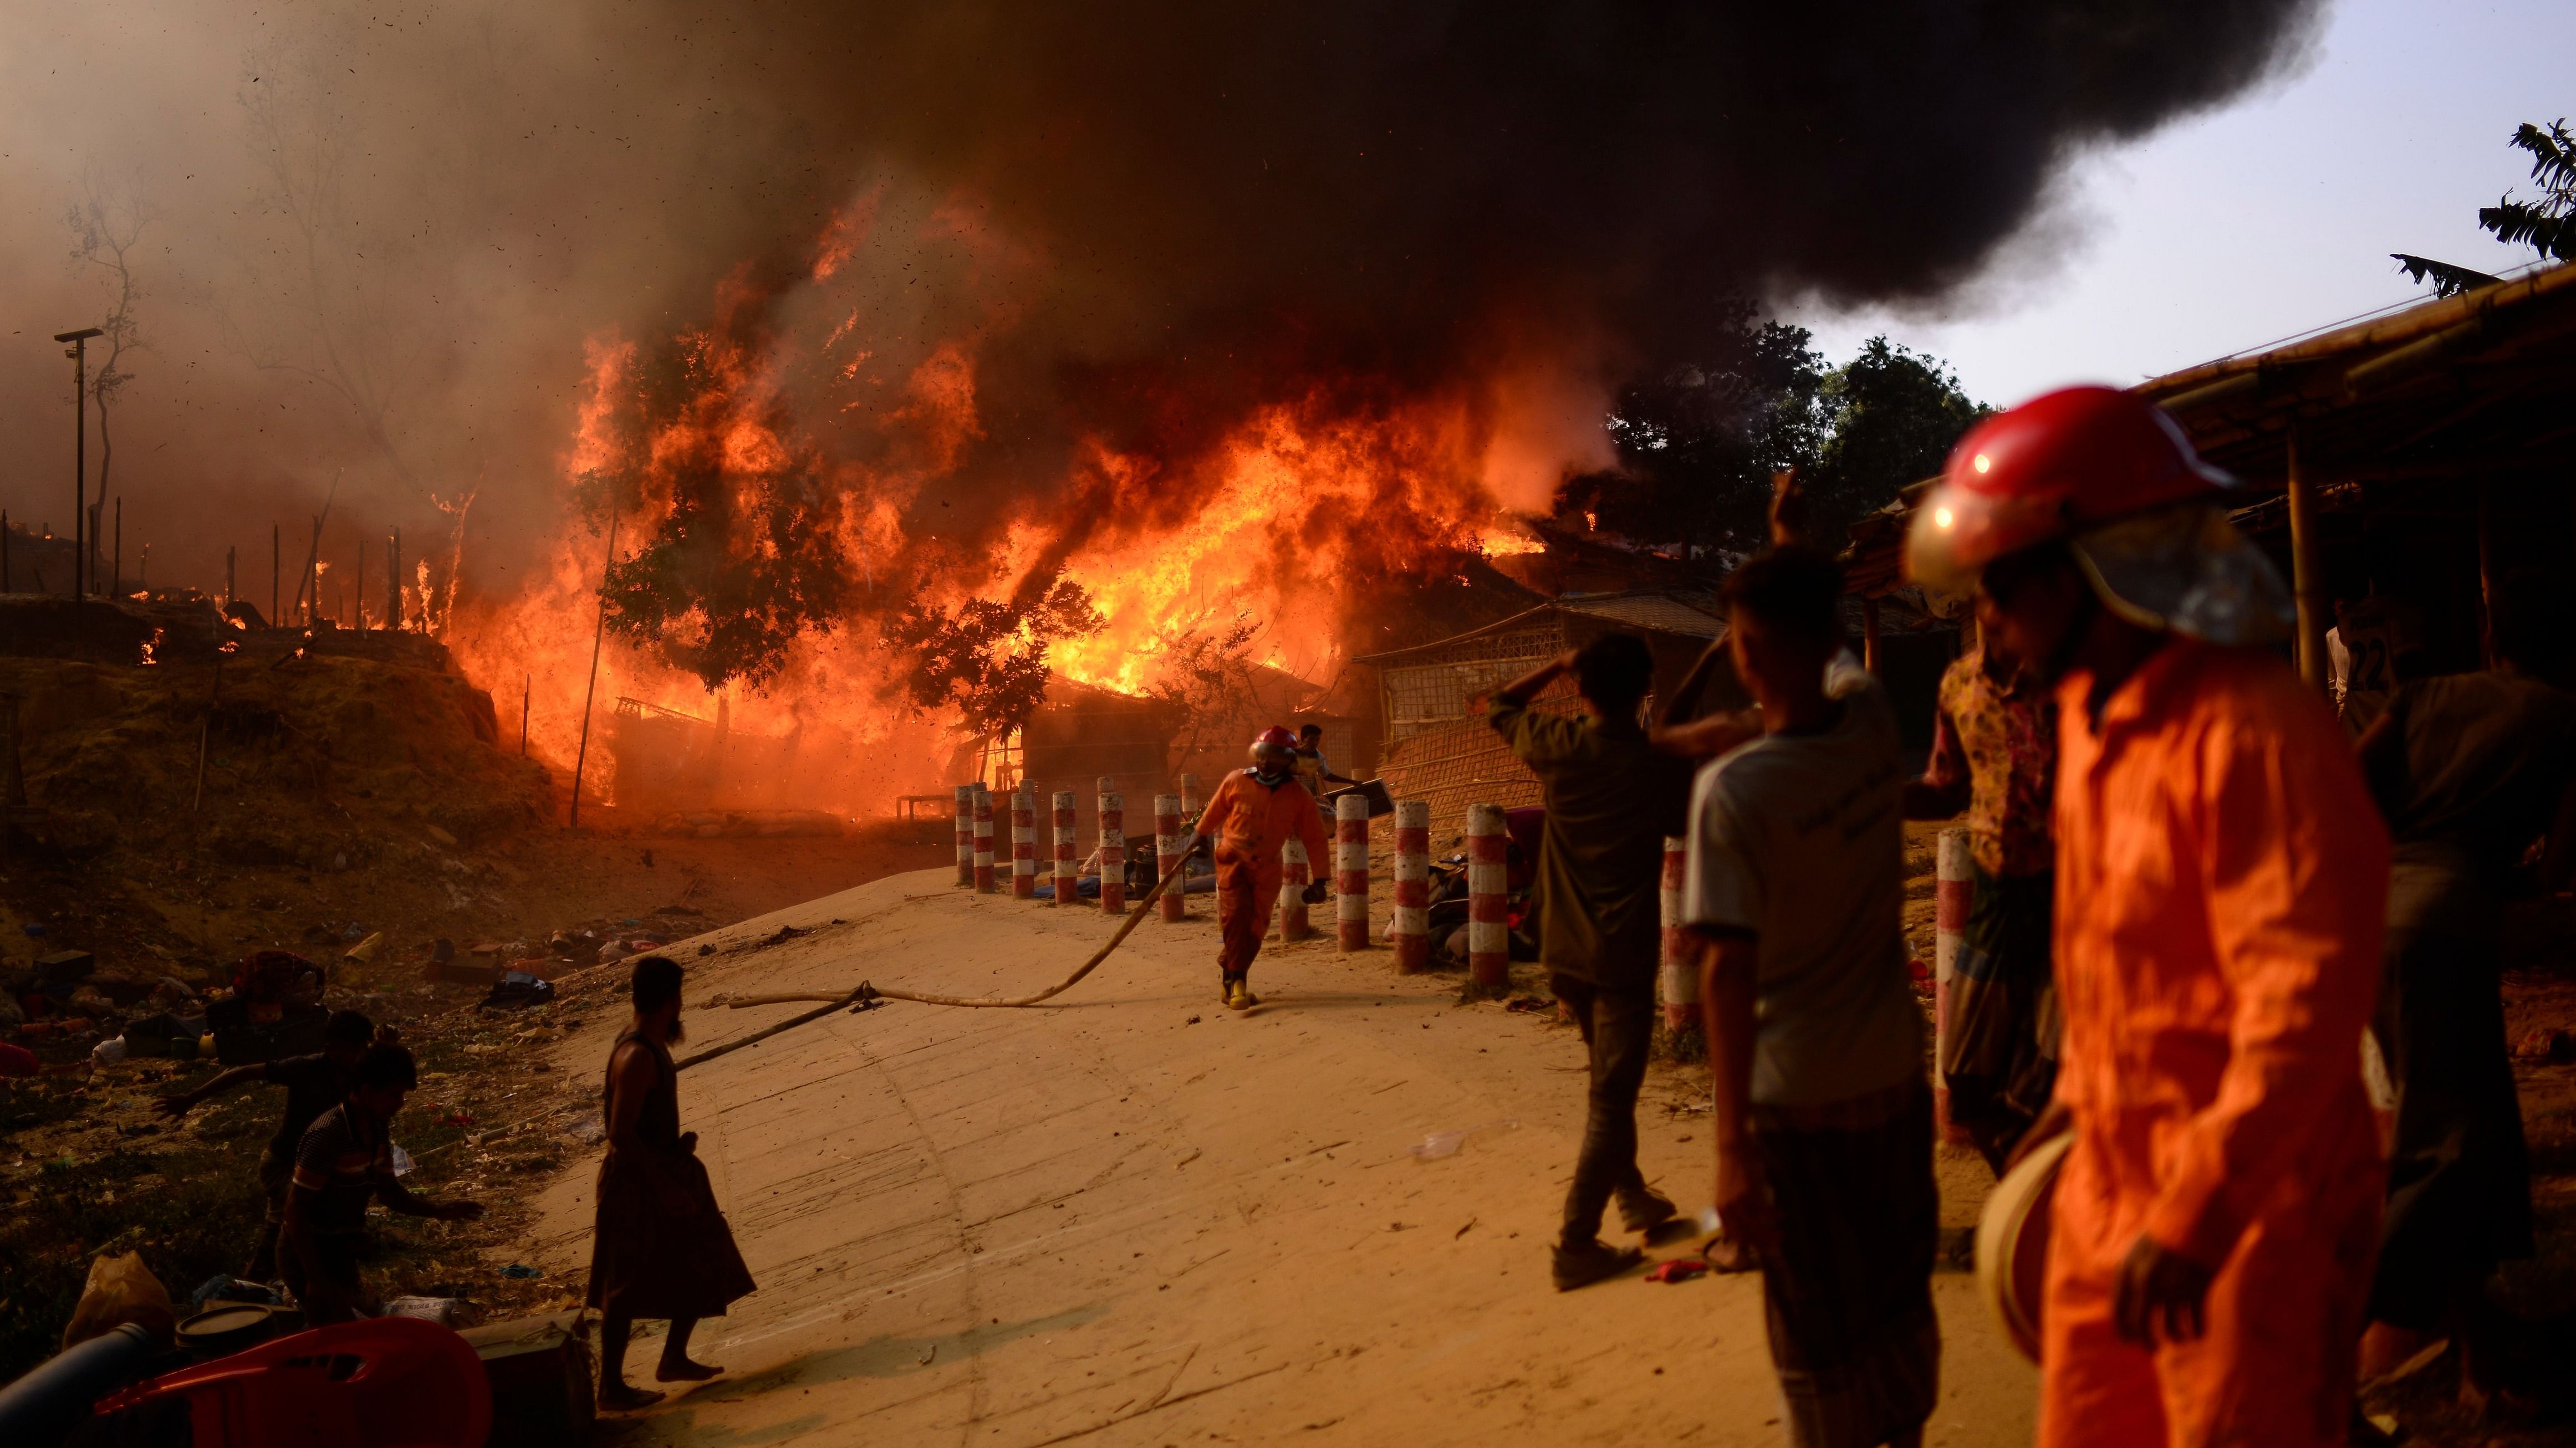 Rohingya refugees try to douse a major fire in their Balukhali camp at Ukhiya in Cox's Bazar district, Bangladesh, Sunday, March 5, 2023. Credit: AP Photo